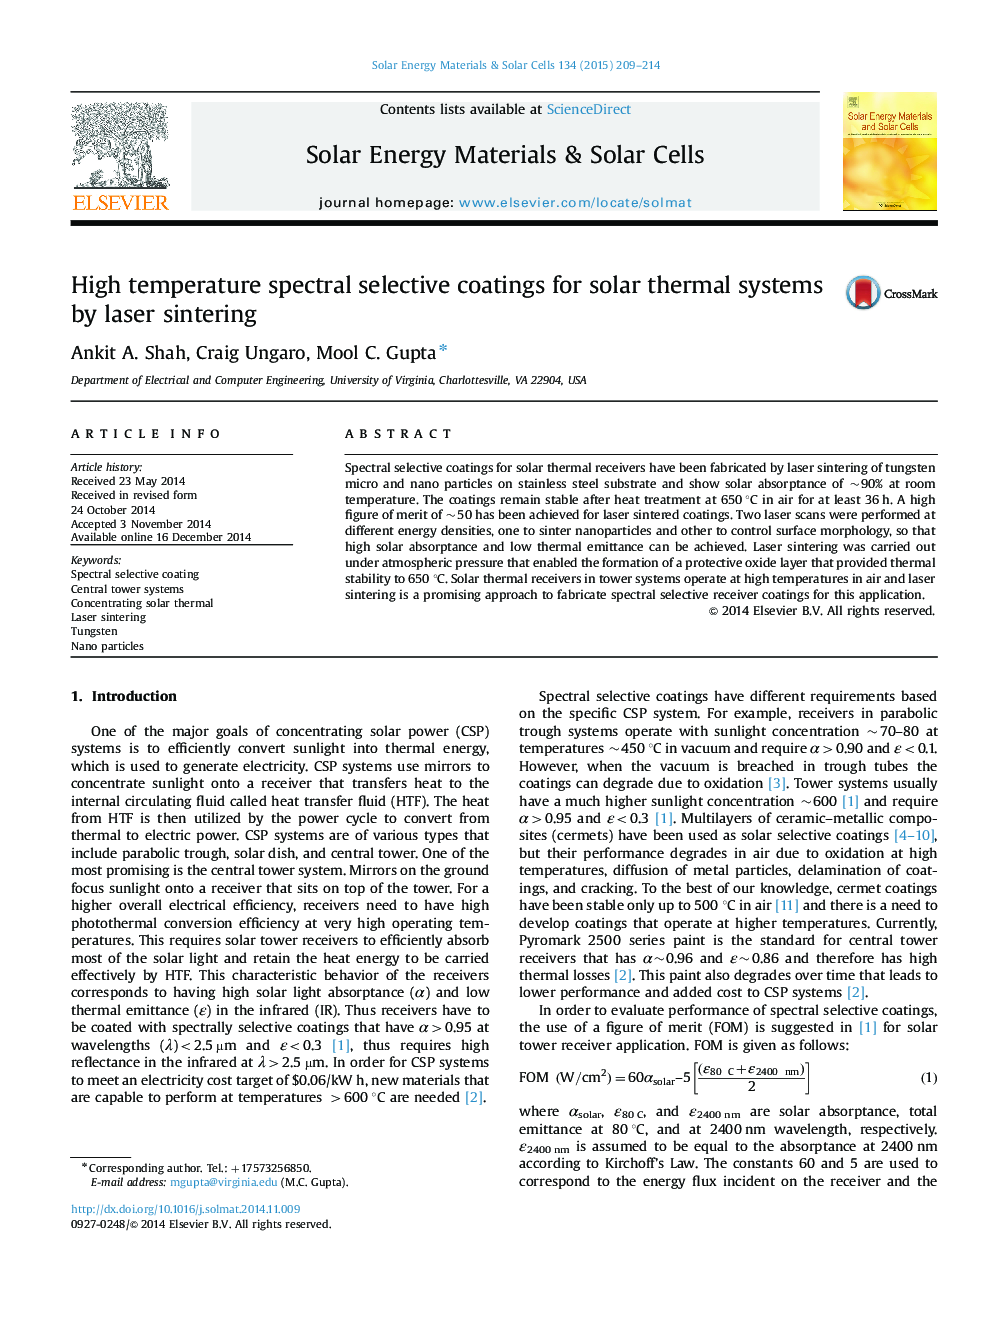 High temperature spectral selective coatings for solar thermal systems by laser sintering